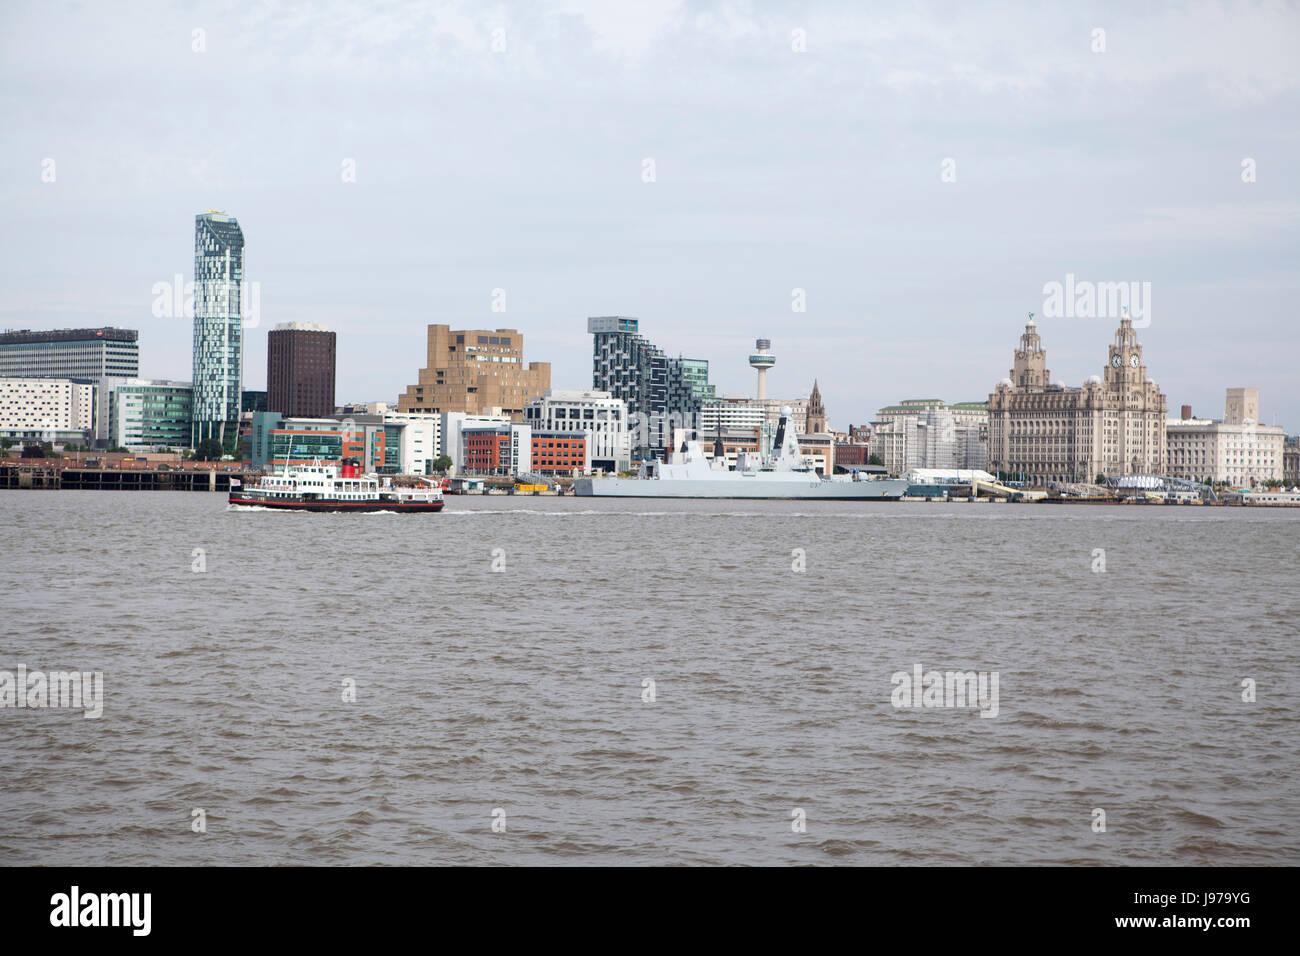 View Across the Rivers Mersey Liverpool uk Stock Photo